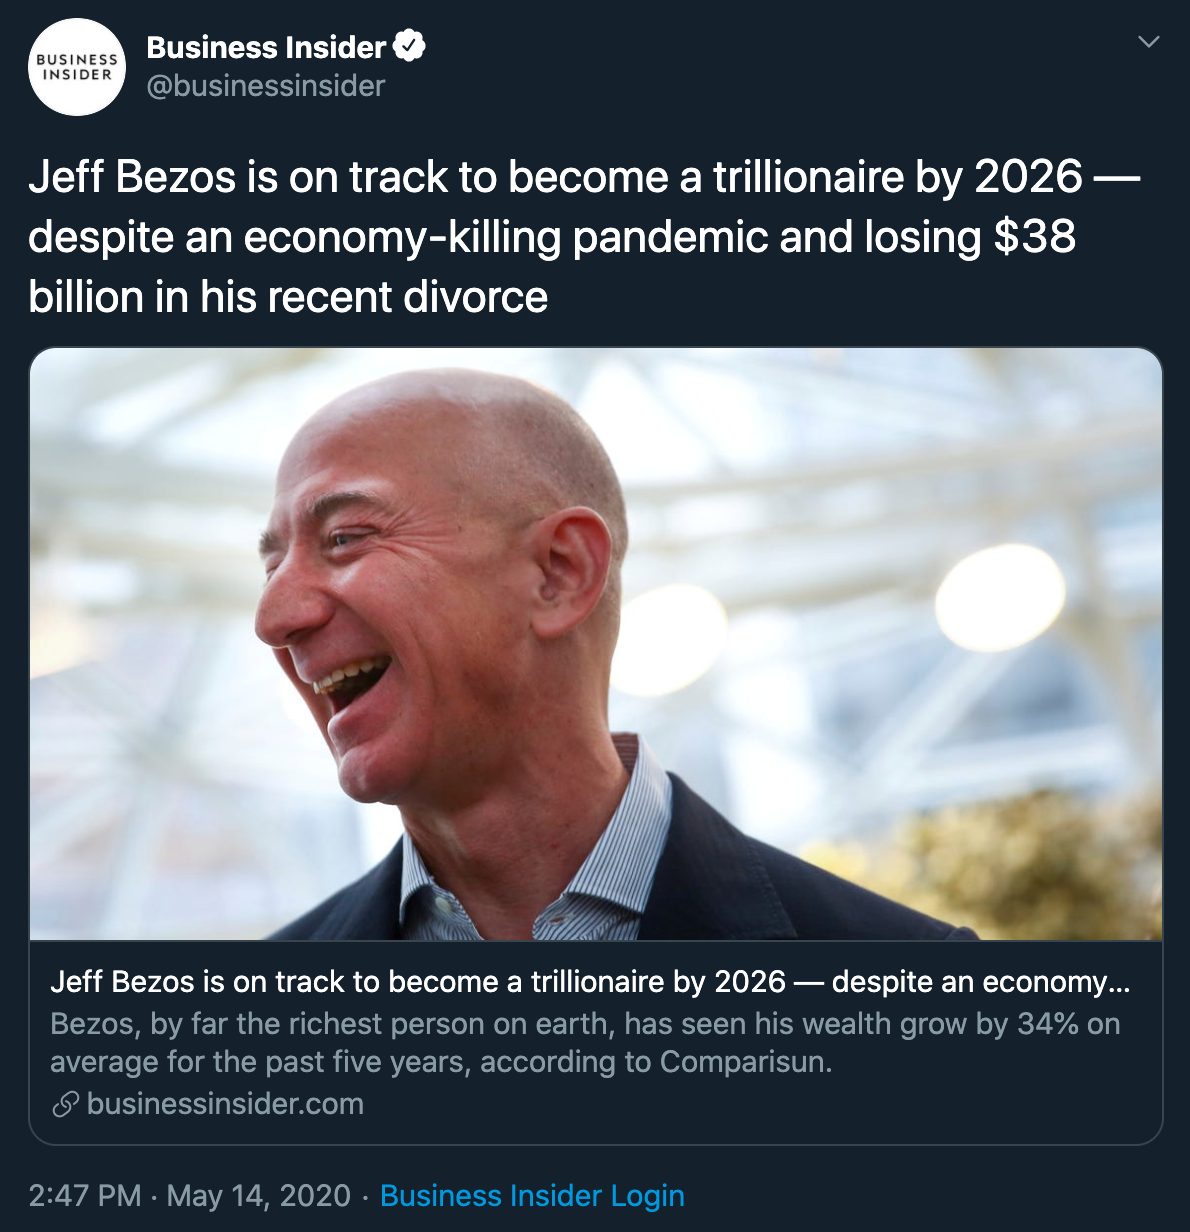 Jeff Bezos is on track to become a trillionaire by 2026 despite an economy killing pandemic and losing $38 billion in his recent divorce